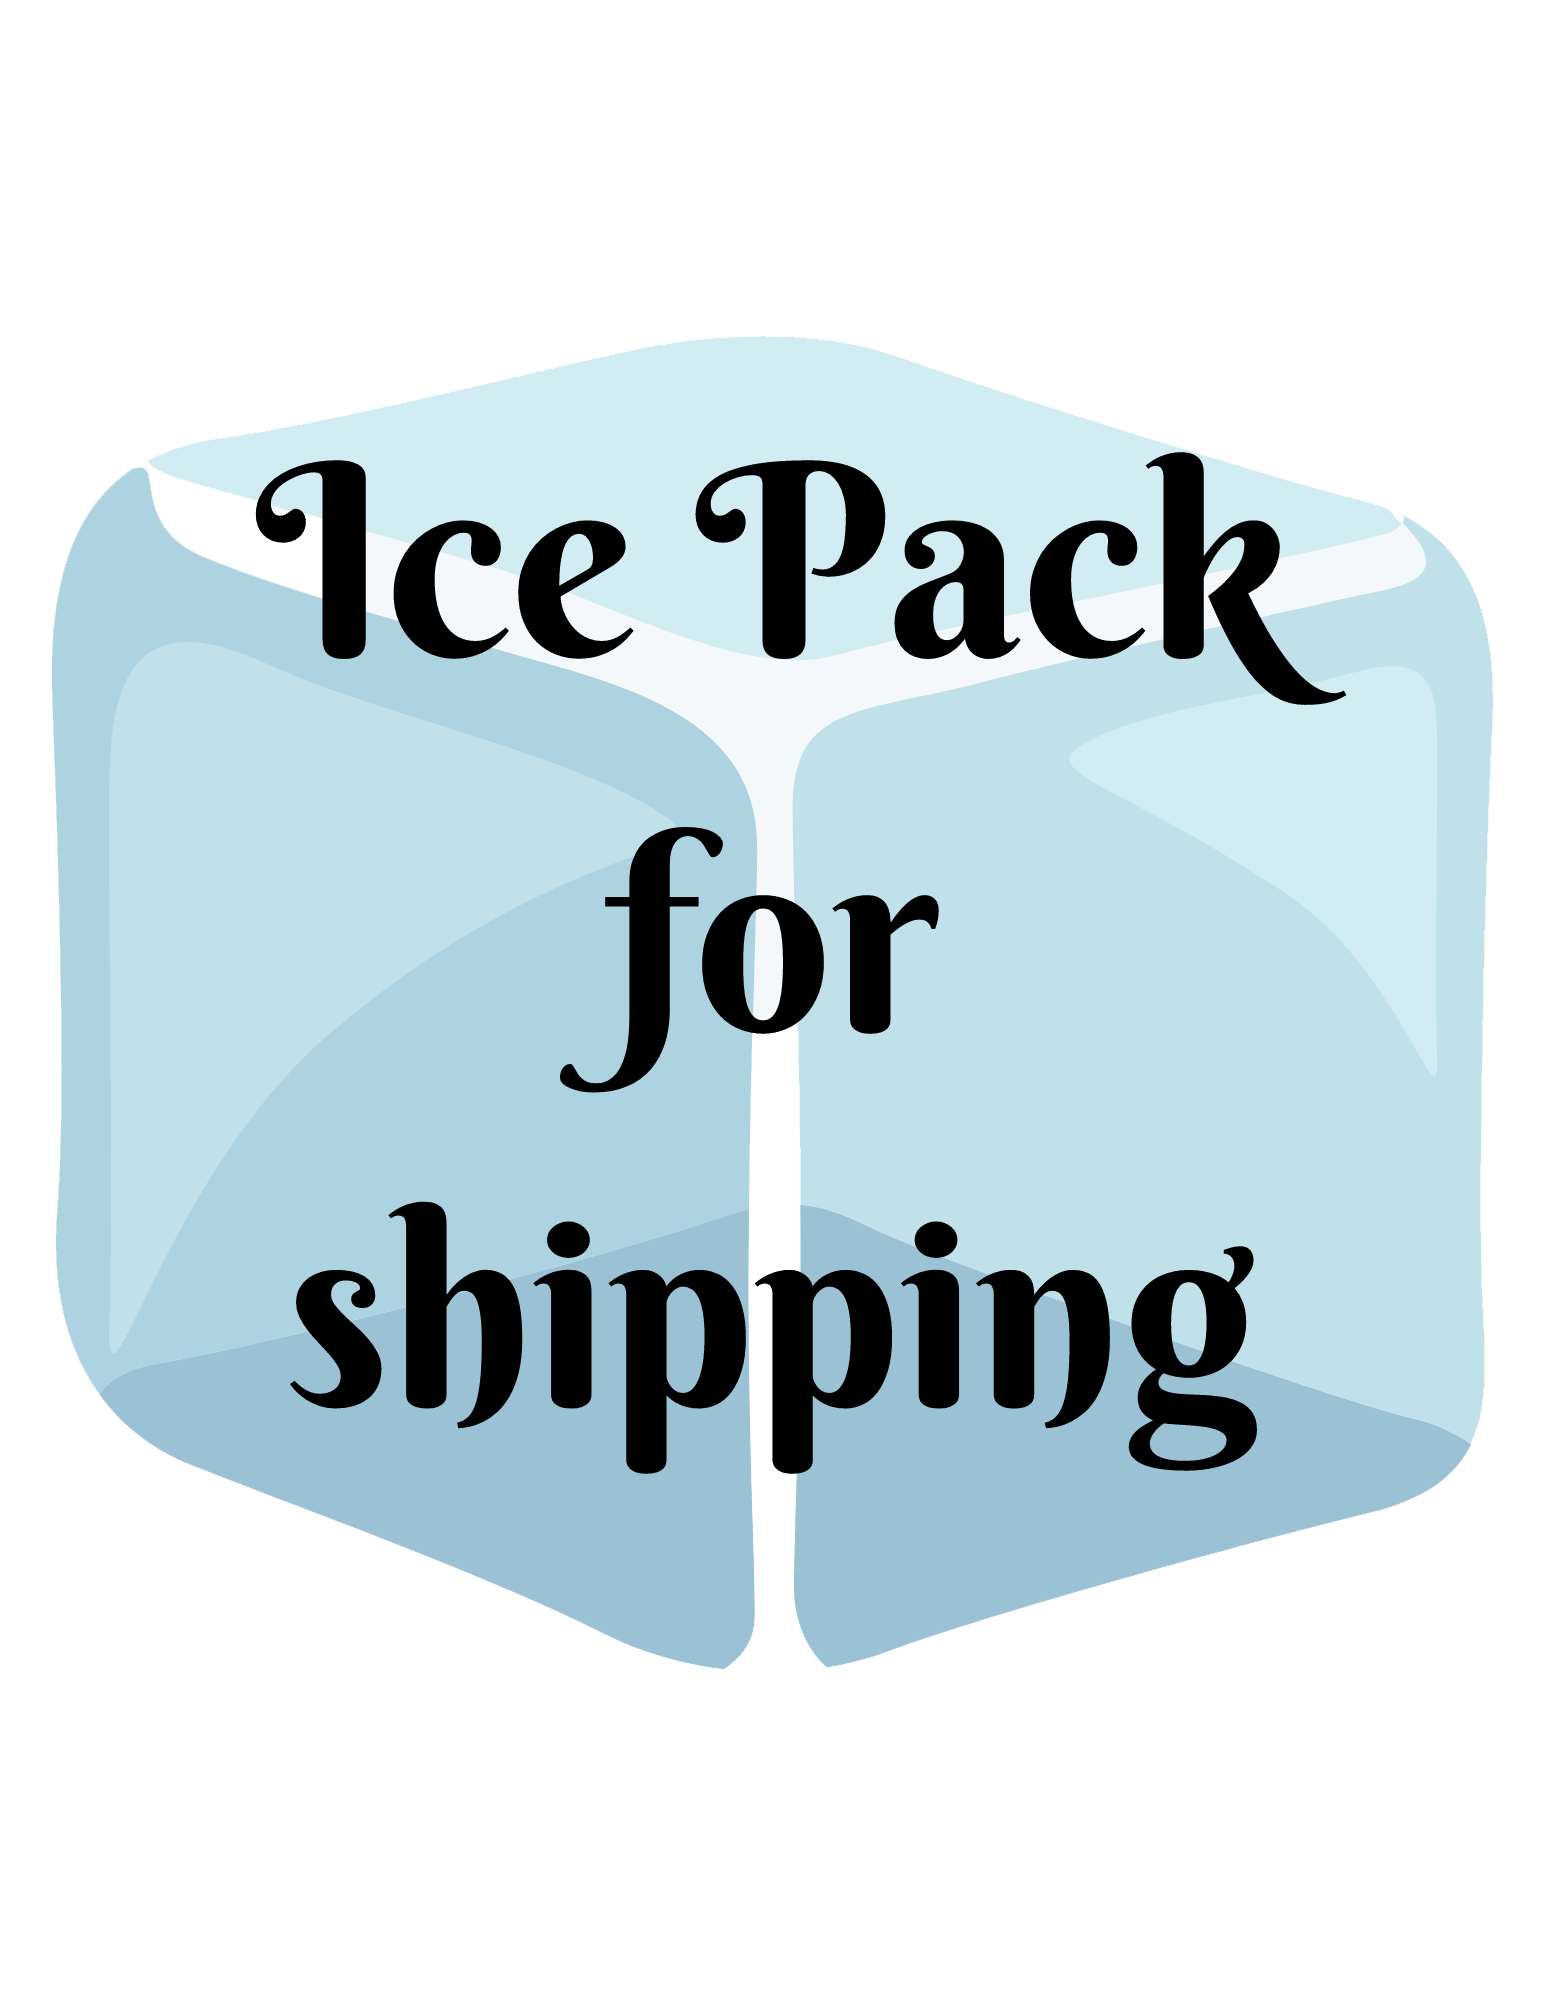 Product Image for ICE PACK for shipping